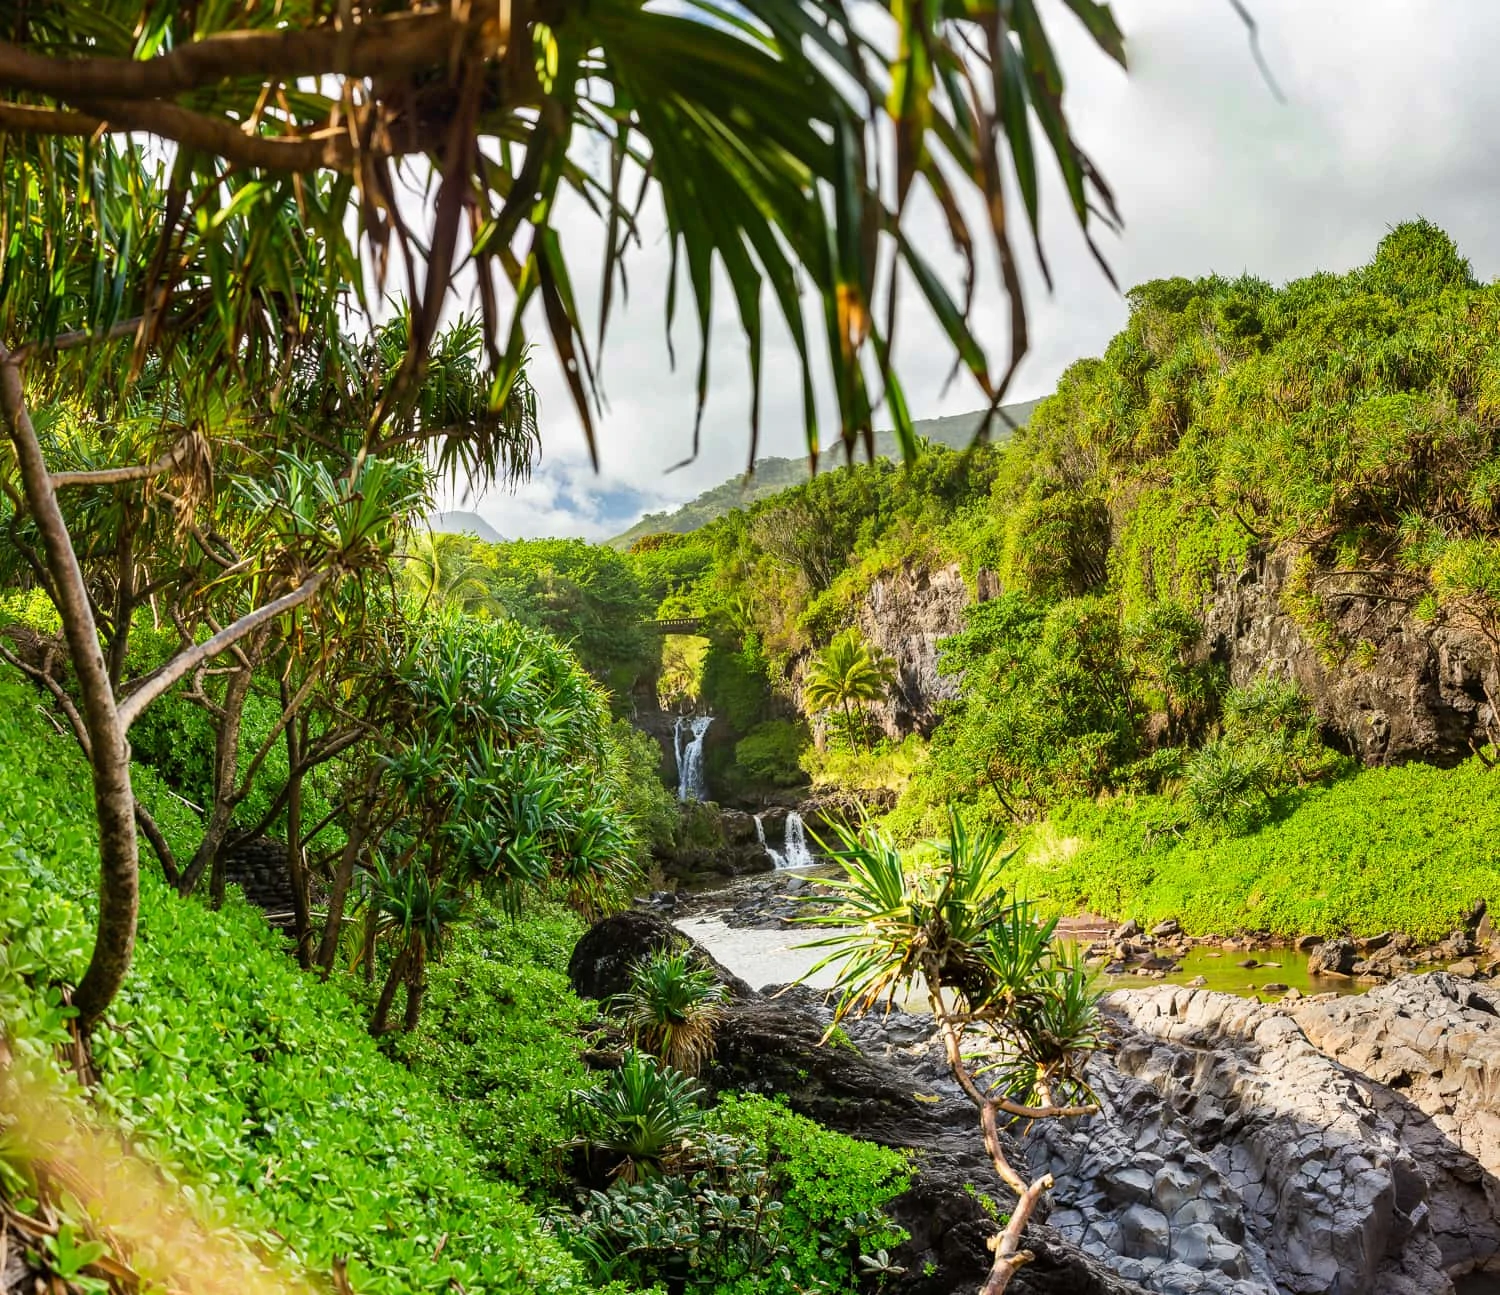 The twin waterfalls of the pools of oheo in Haleakala National Park from the Kipahulu District. Green jungle foliage surrounds the falls.